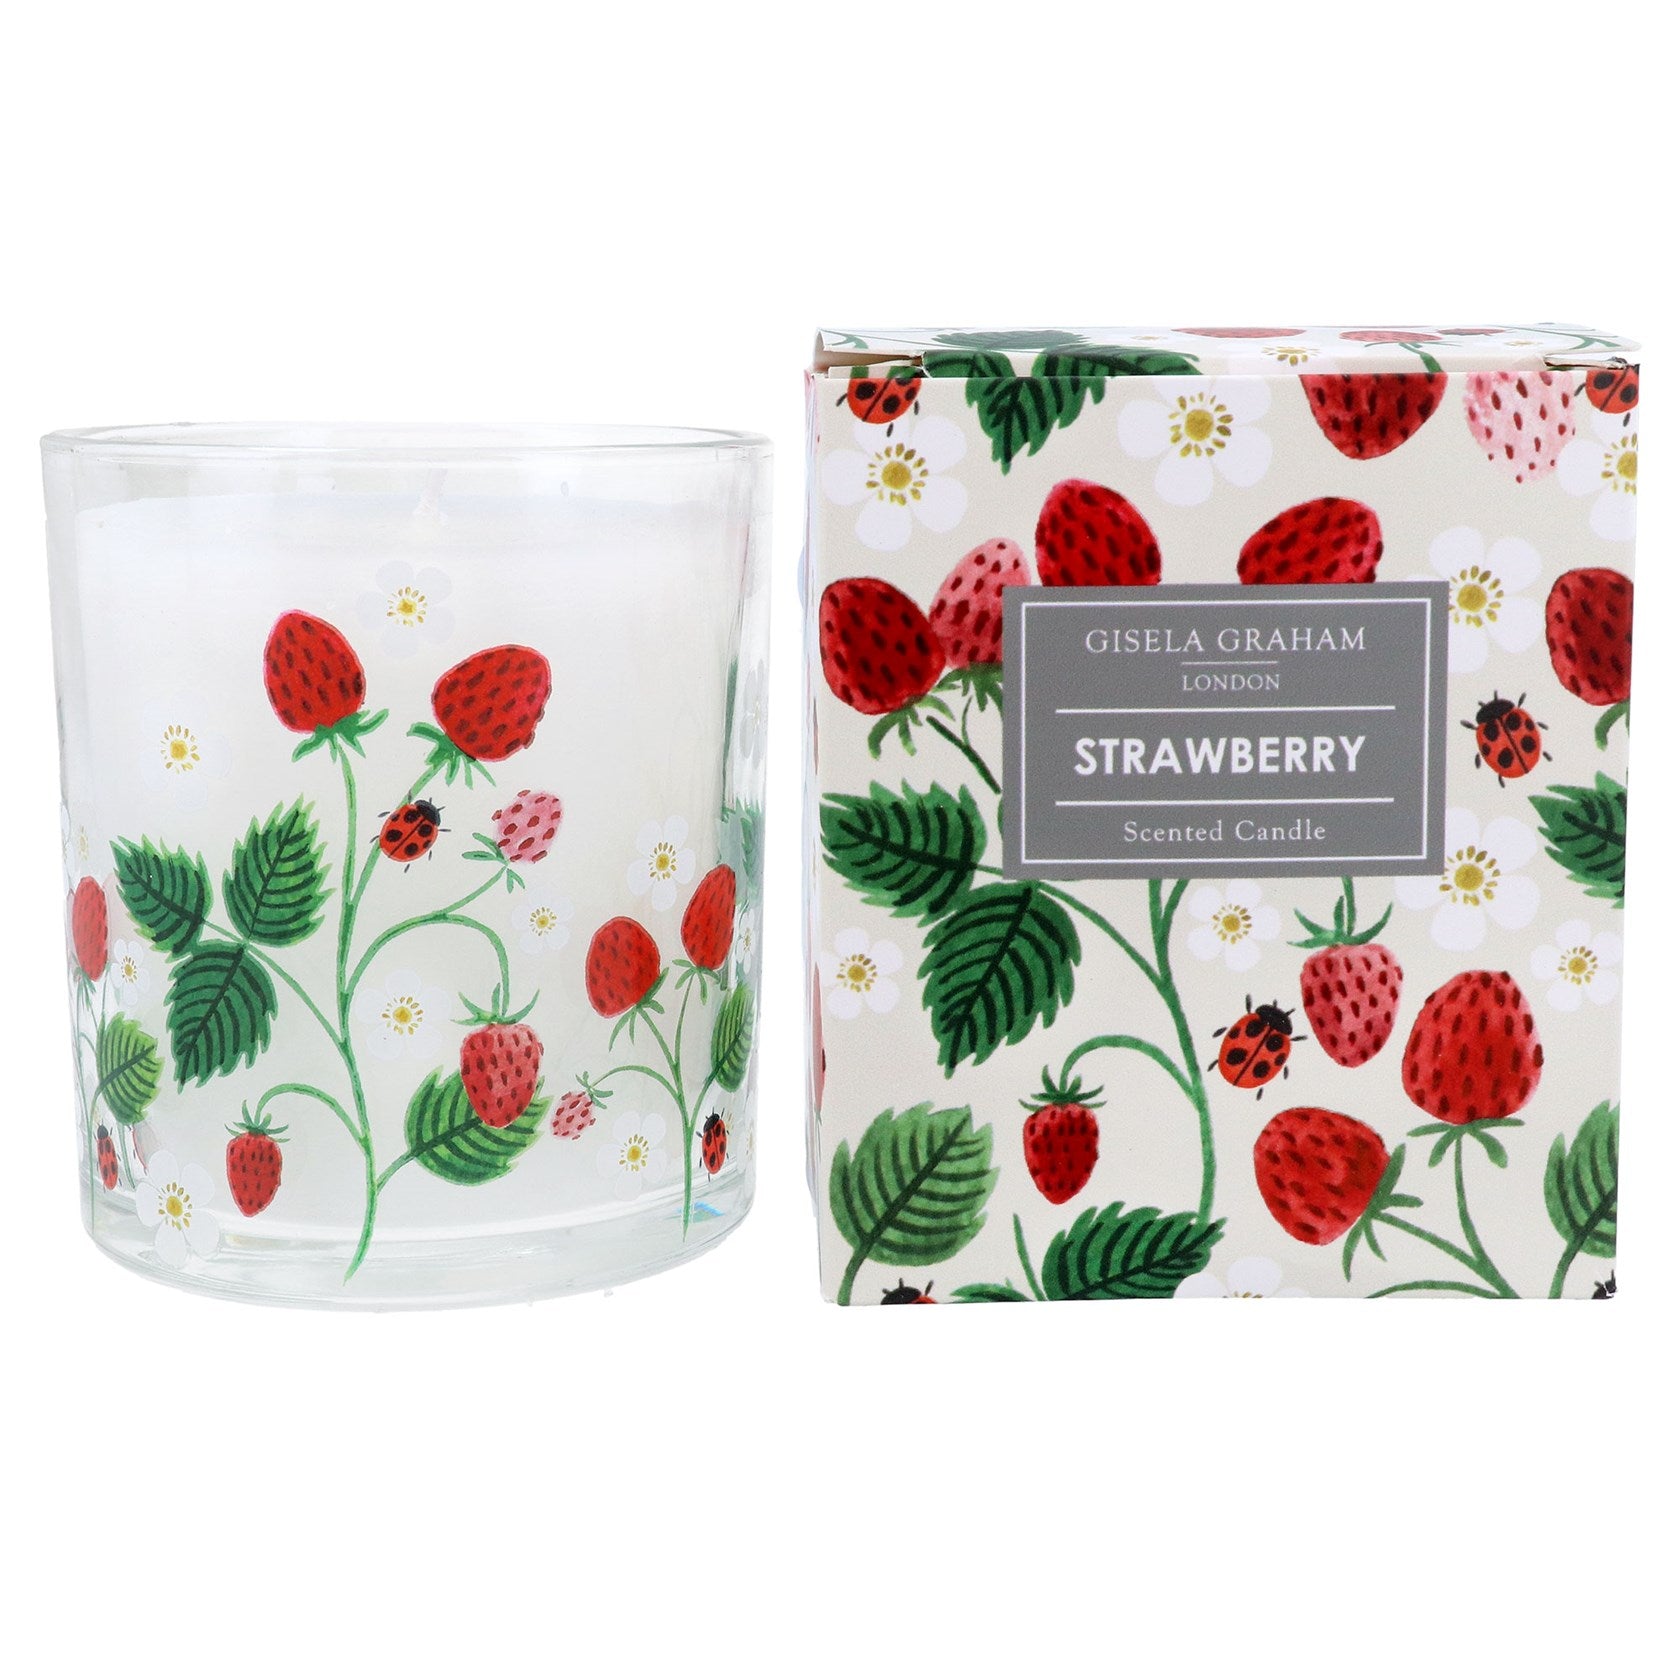 Strawberries Scented Candle in a Pot - Large